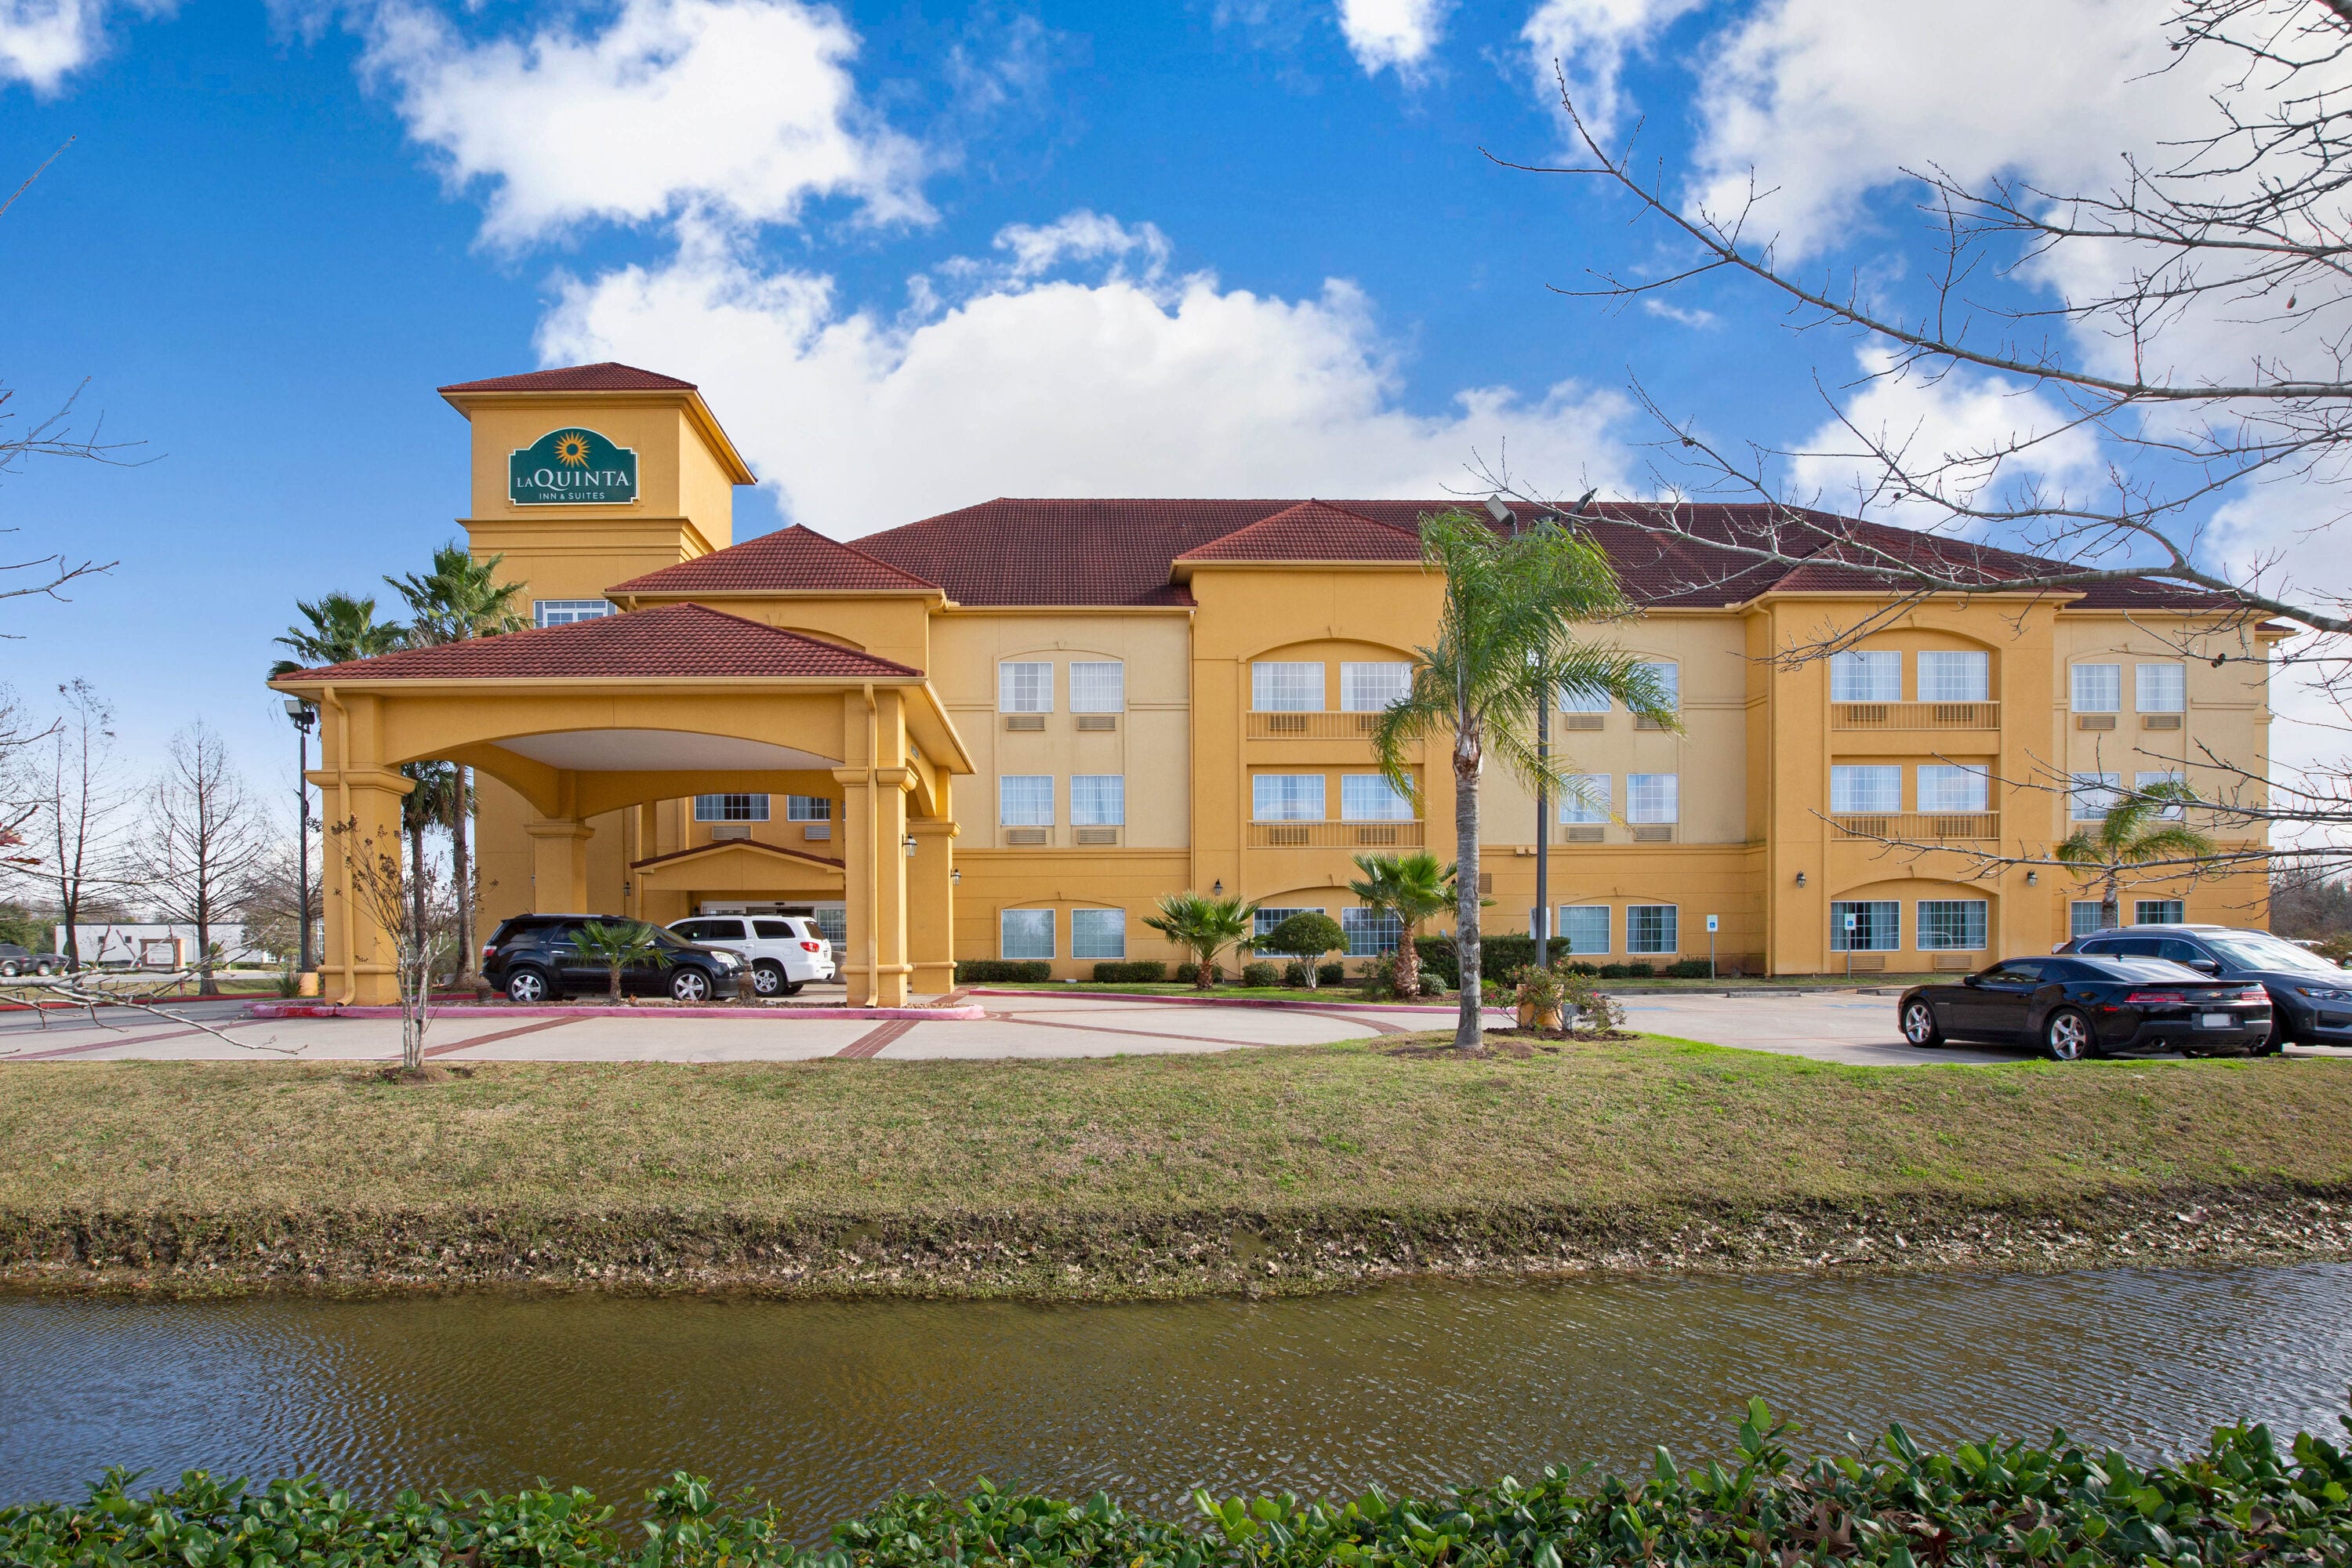 Pearland Hotel